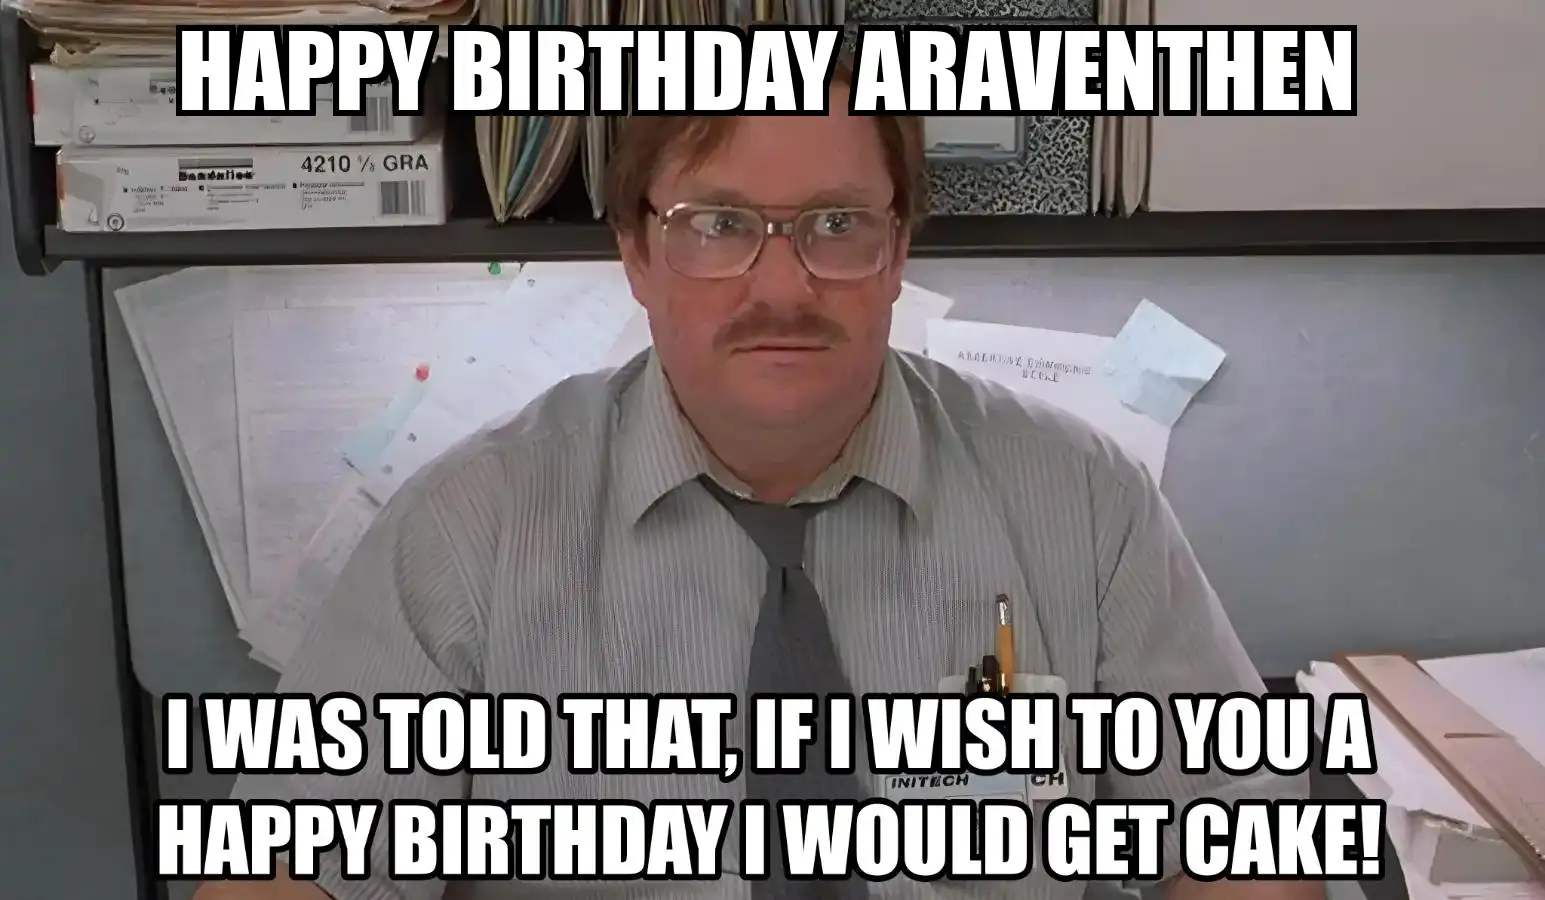 Happy Birthday Araventhen I Would Get A Cake Meme